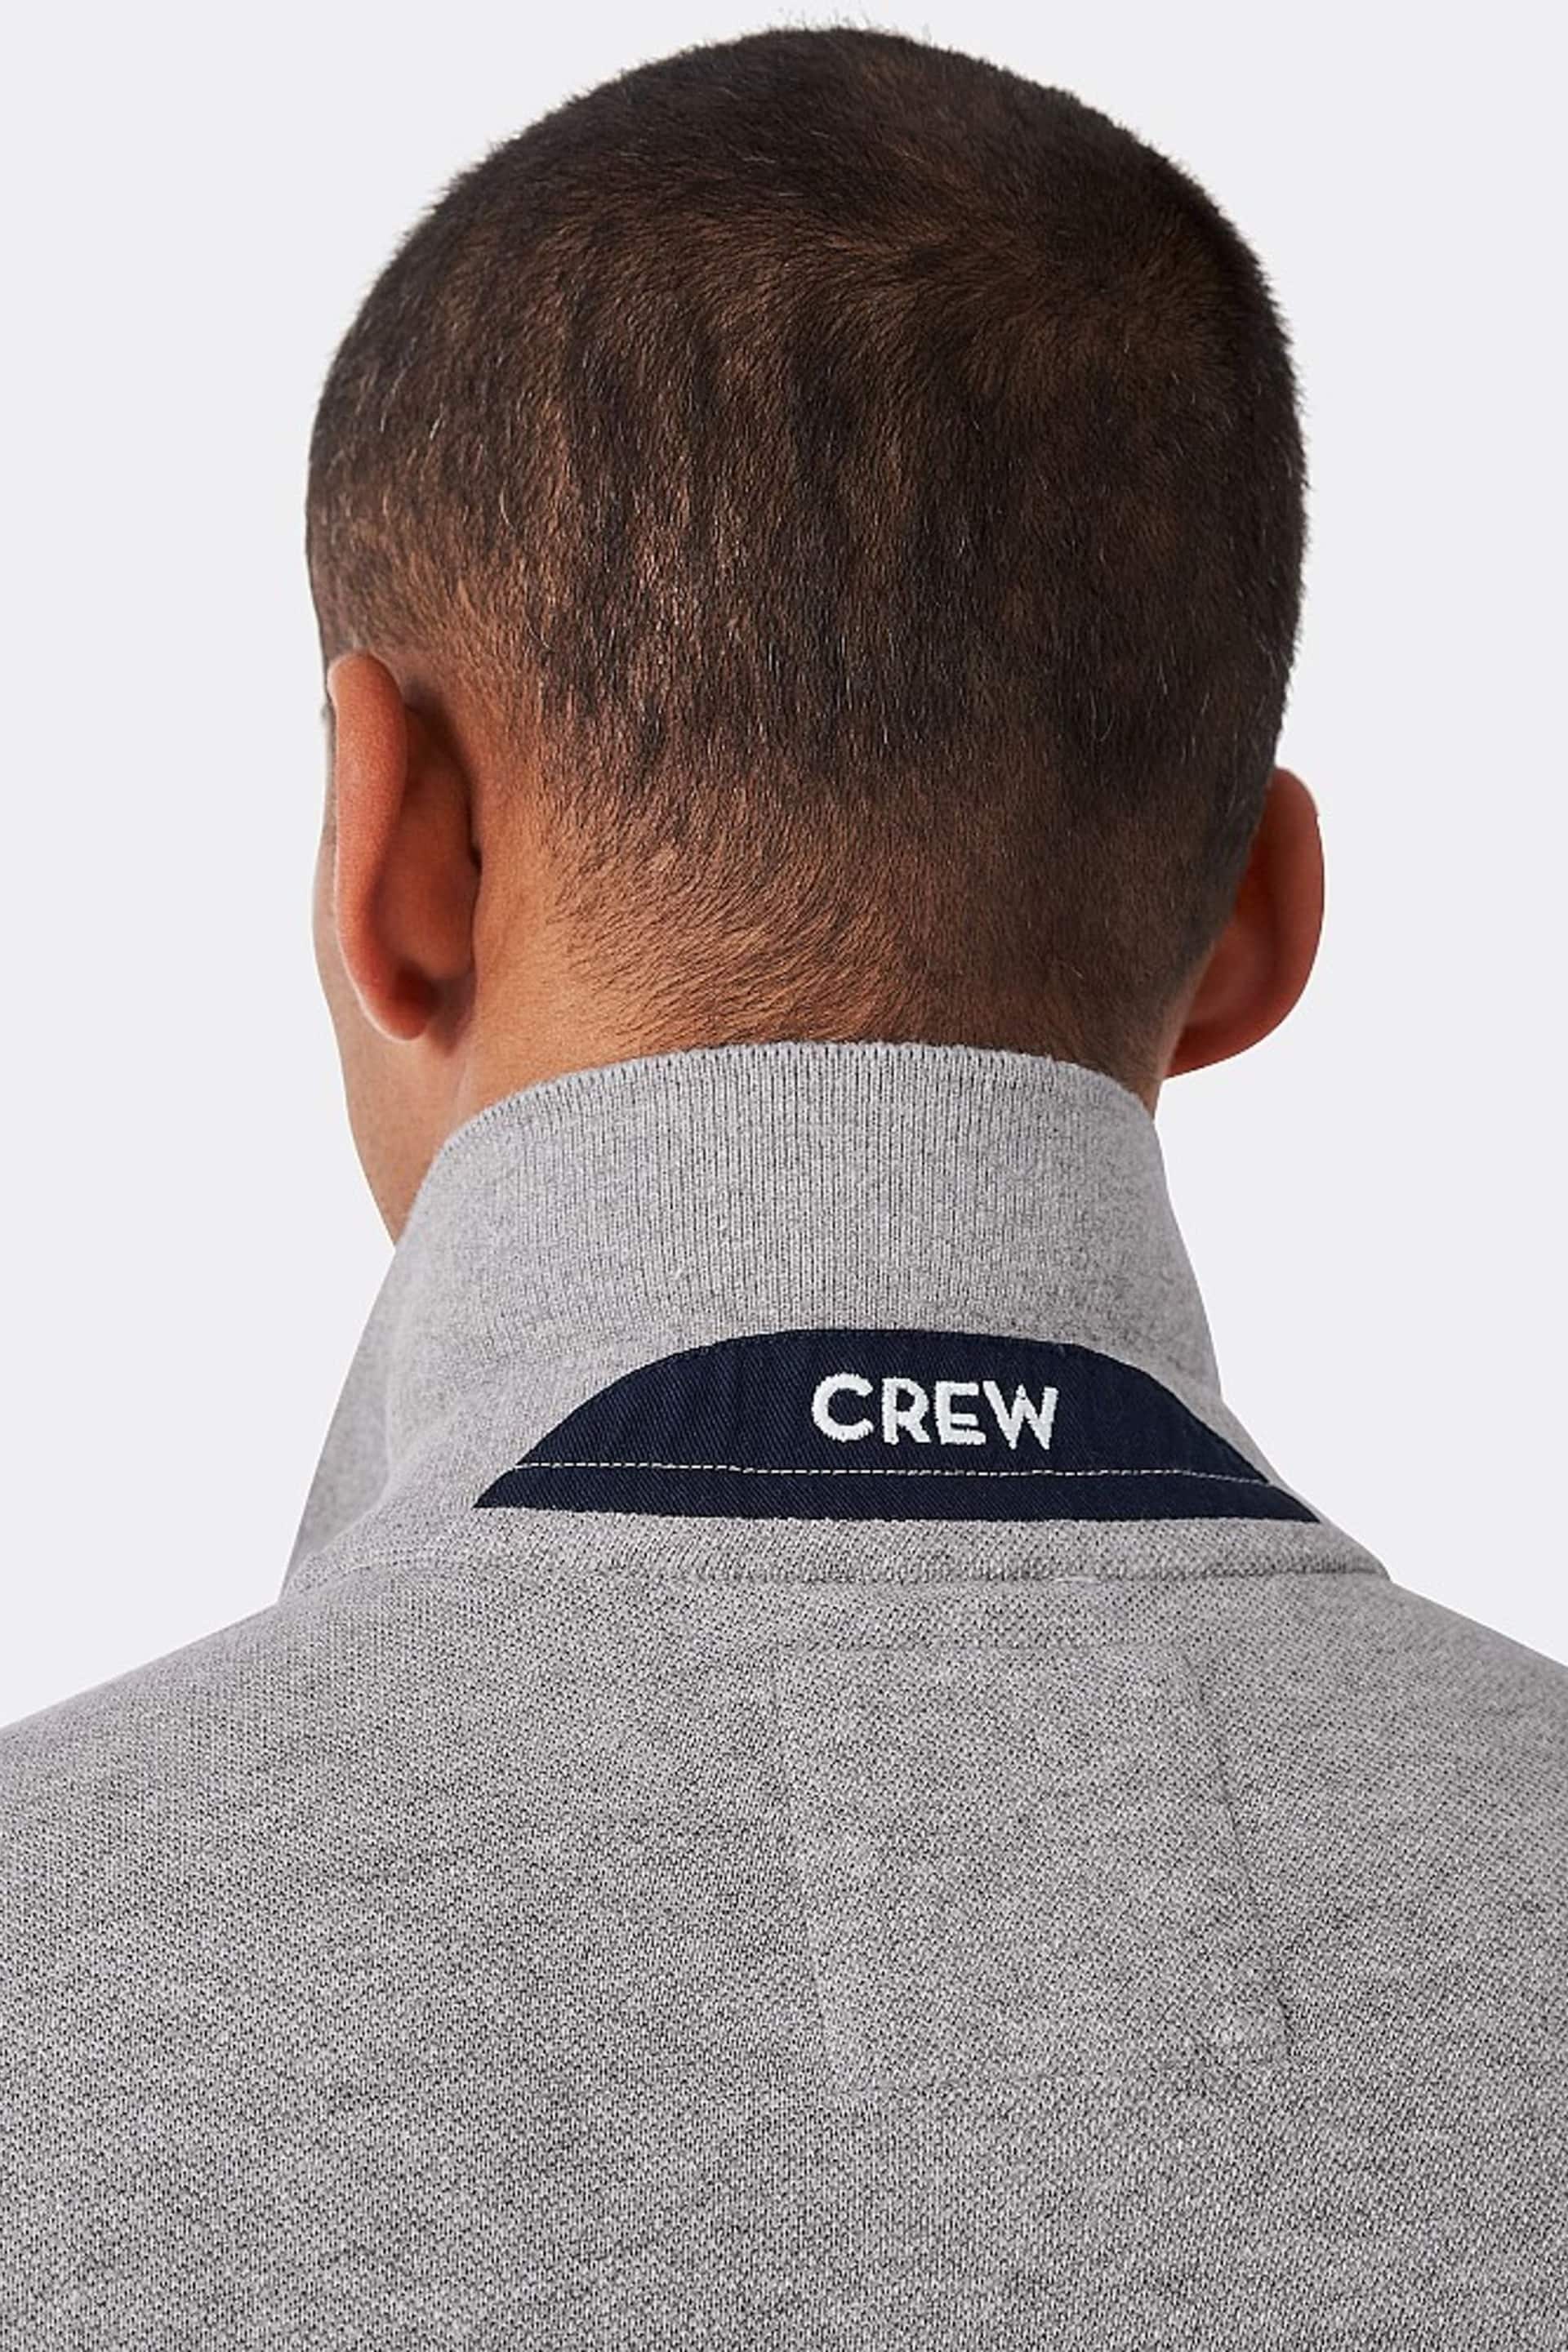 Crew Clothing Classic Cotton Pique Polo Shirt - Image 4 of 5